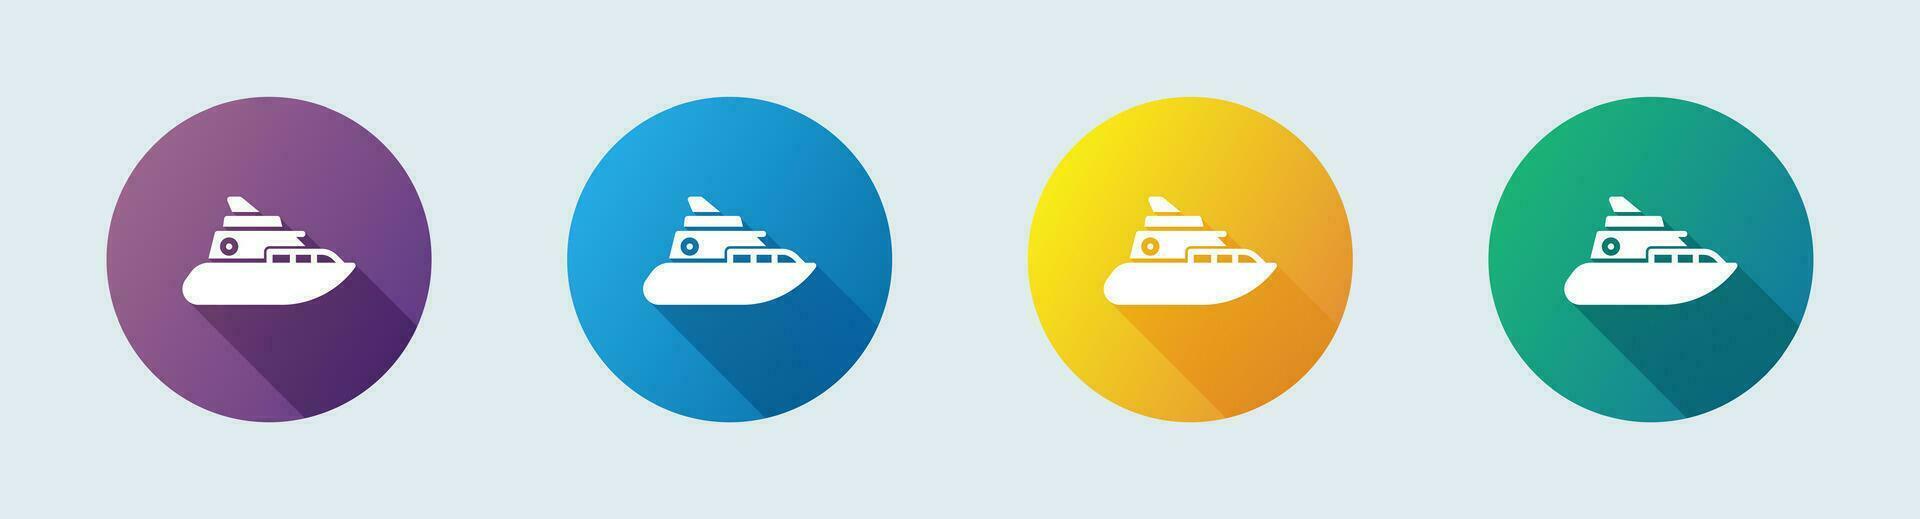 Yacht solid icon in flat design style. Ship signs vector illustration.